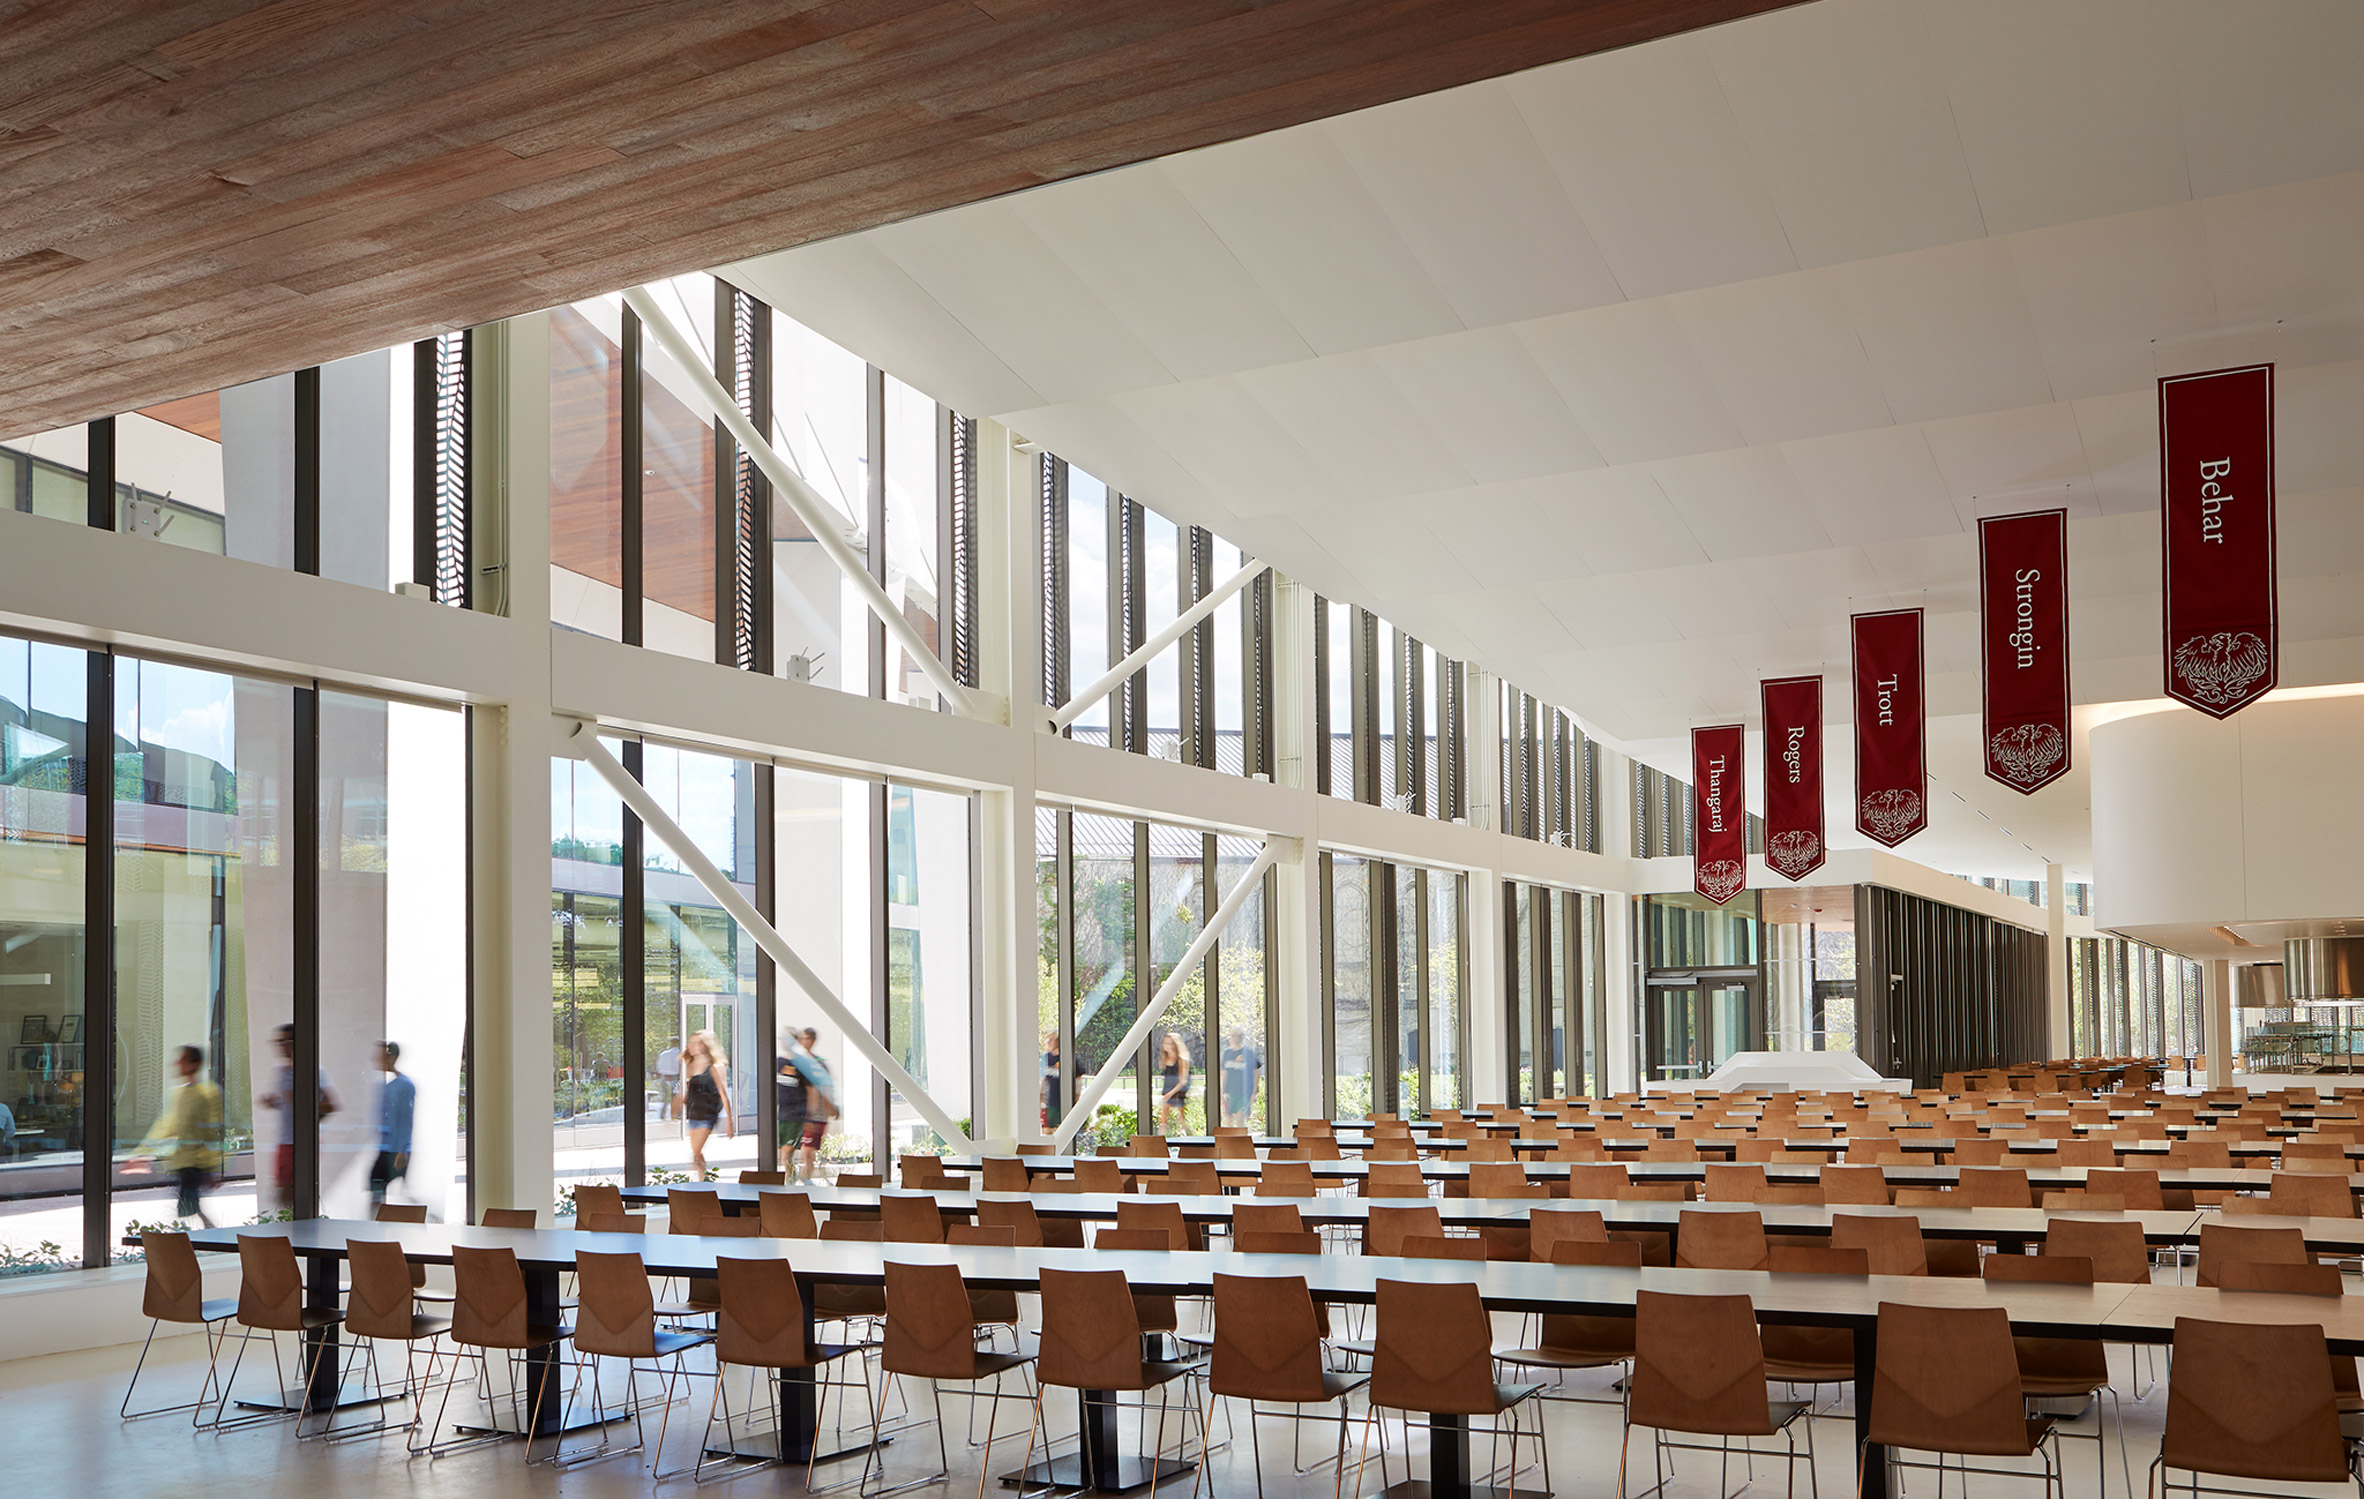 university-of-chicago-campus-north-residential-commons_studio-gang-architects_steve-hall-copyright-hedrich-blessing_dezeen_2364_col_4